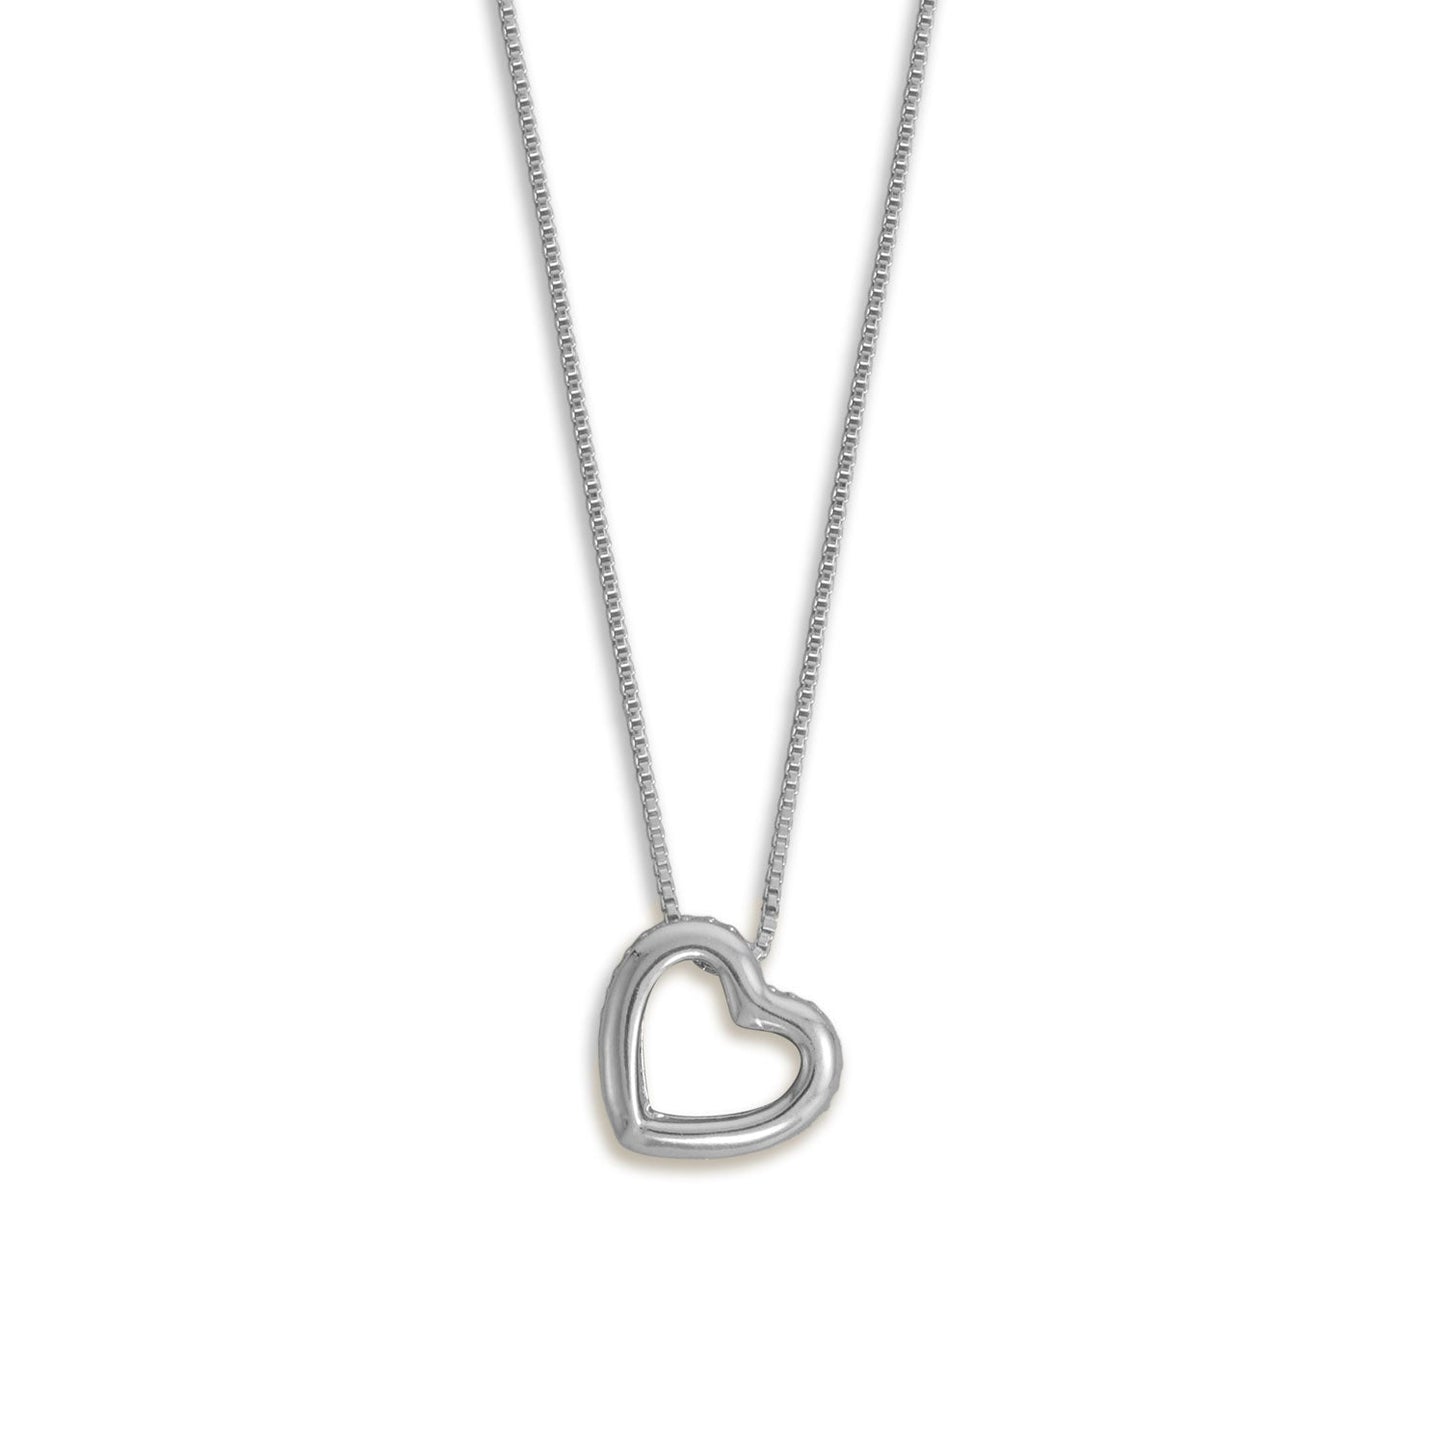 16" + 2" Rhodium Plated CZ Lined Floating Heart Necklace